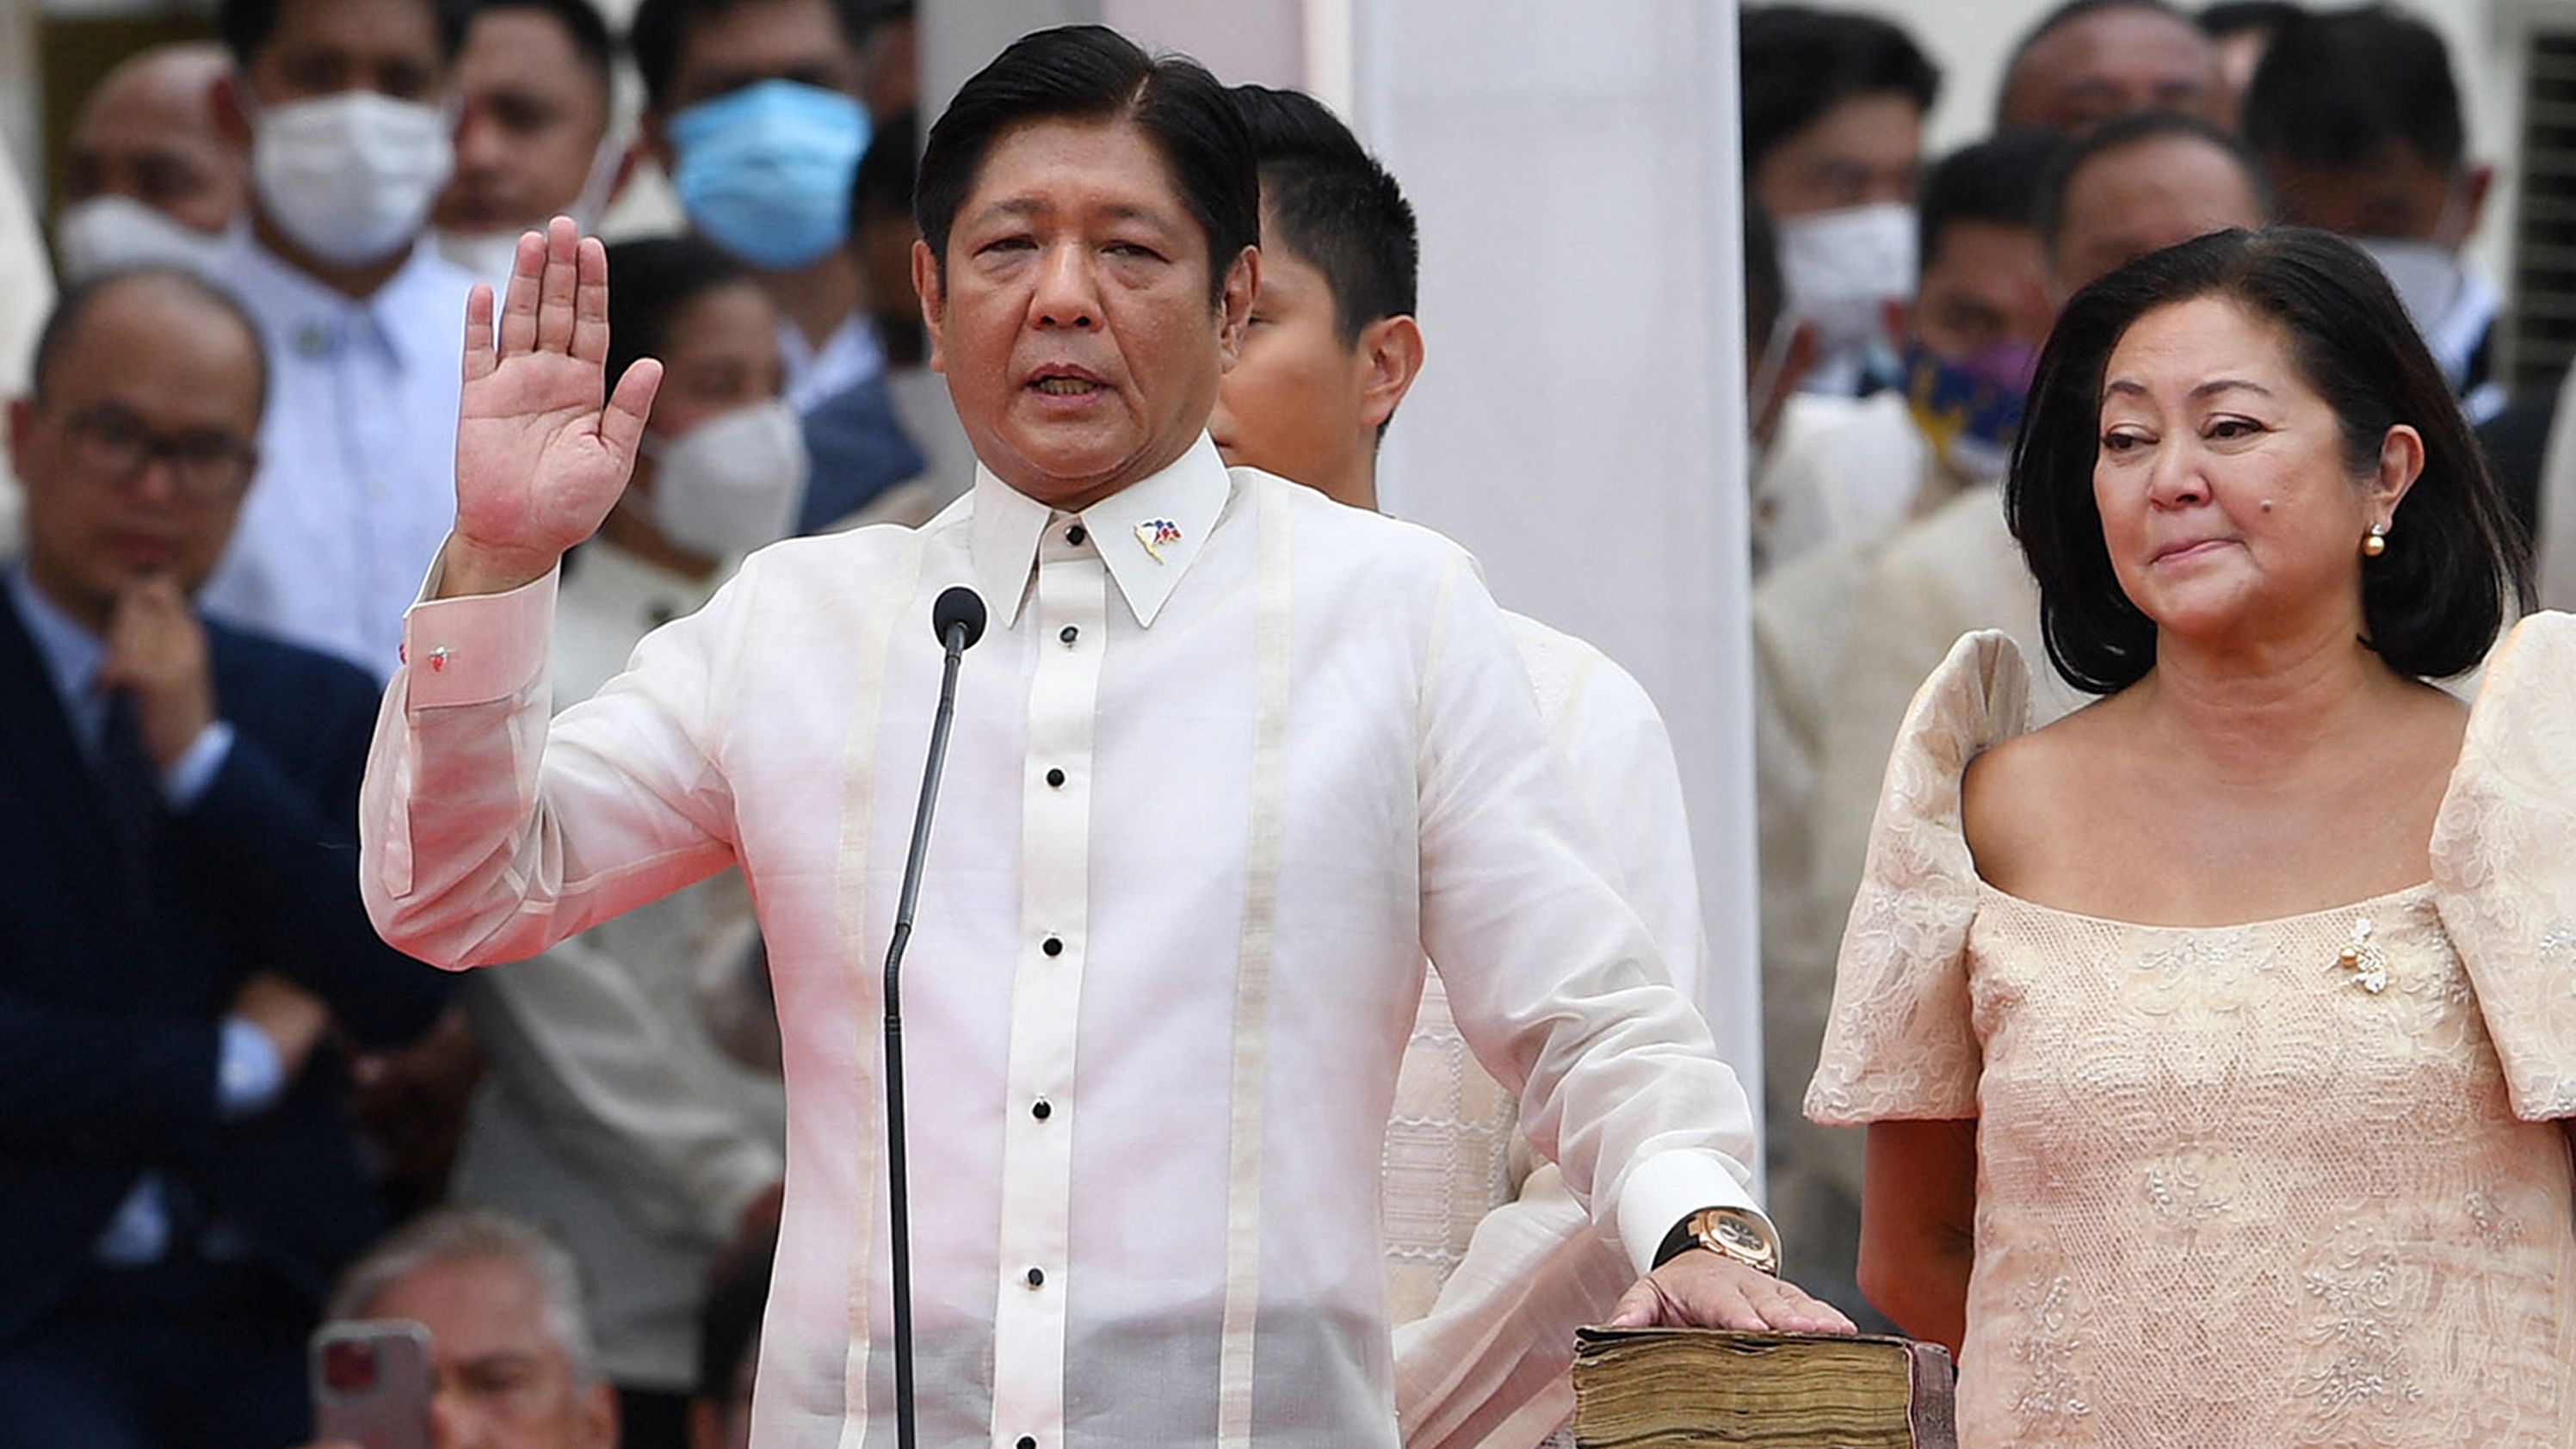 Ferdinand "Bongbong" Marcos Jr. takes the oath as the new President of the Philippines on June 30, 2022.